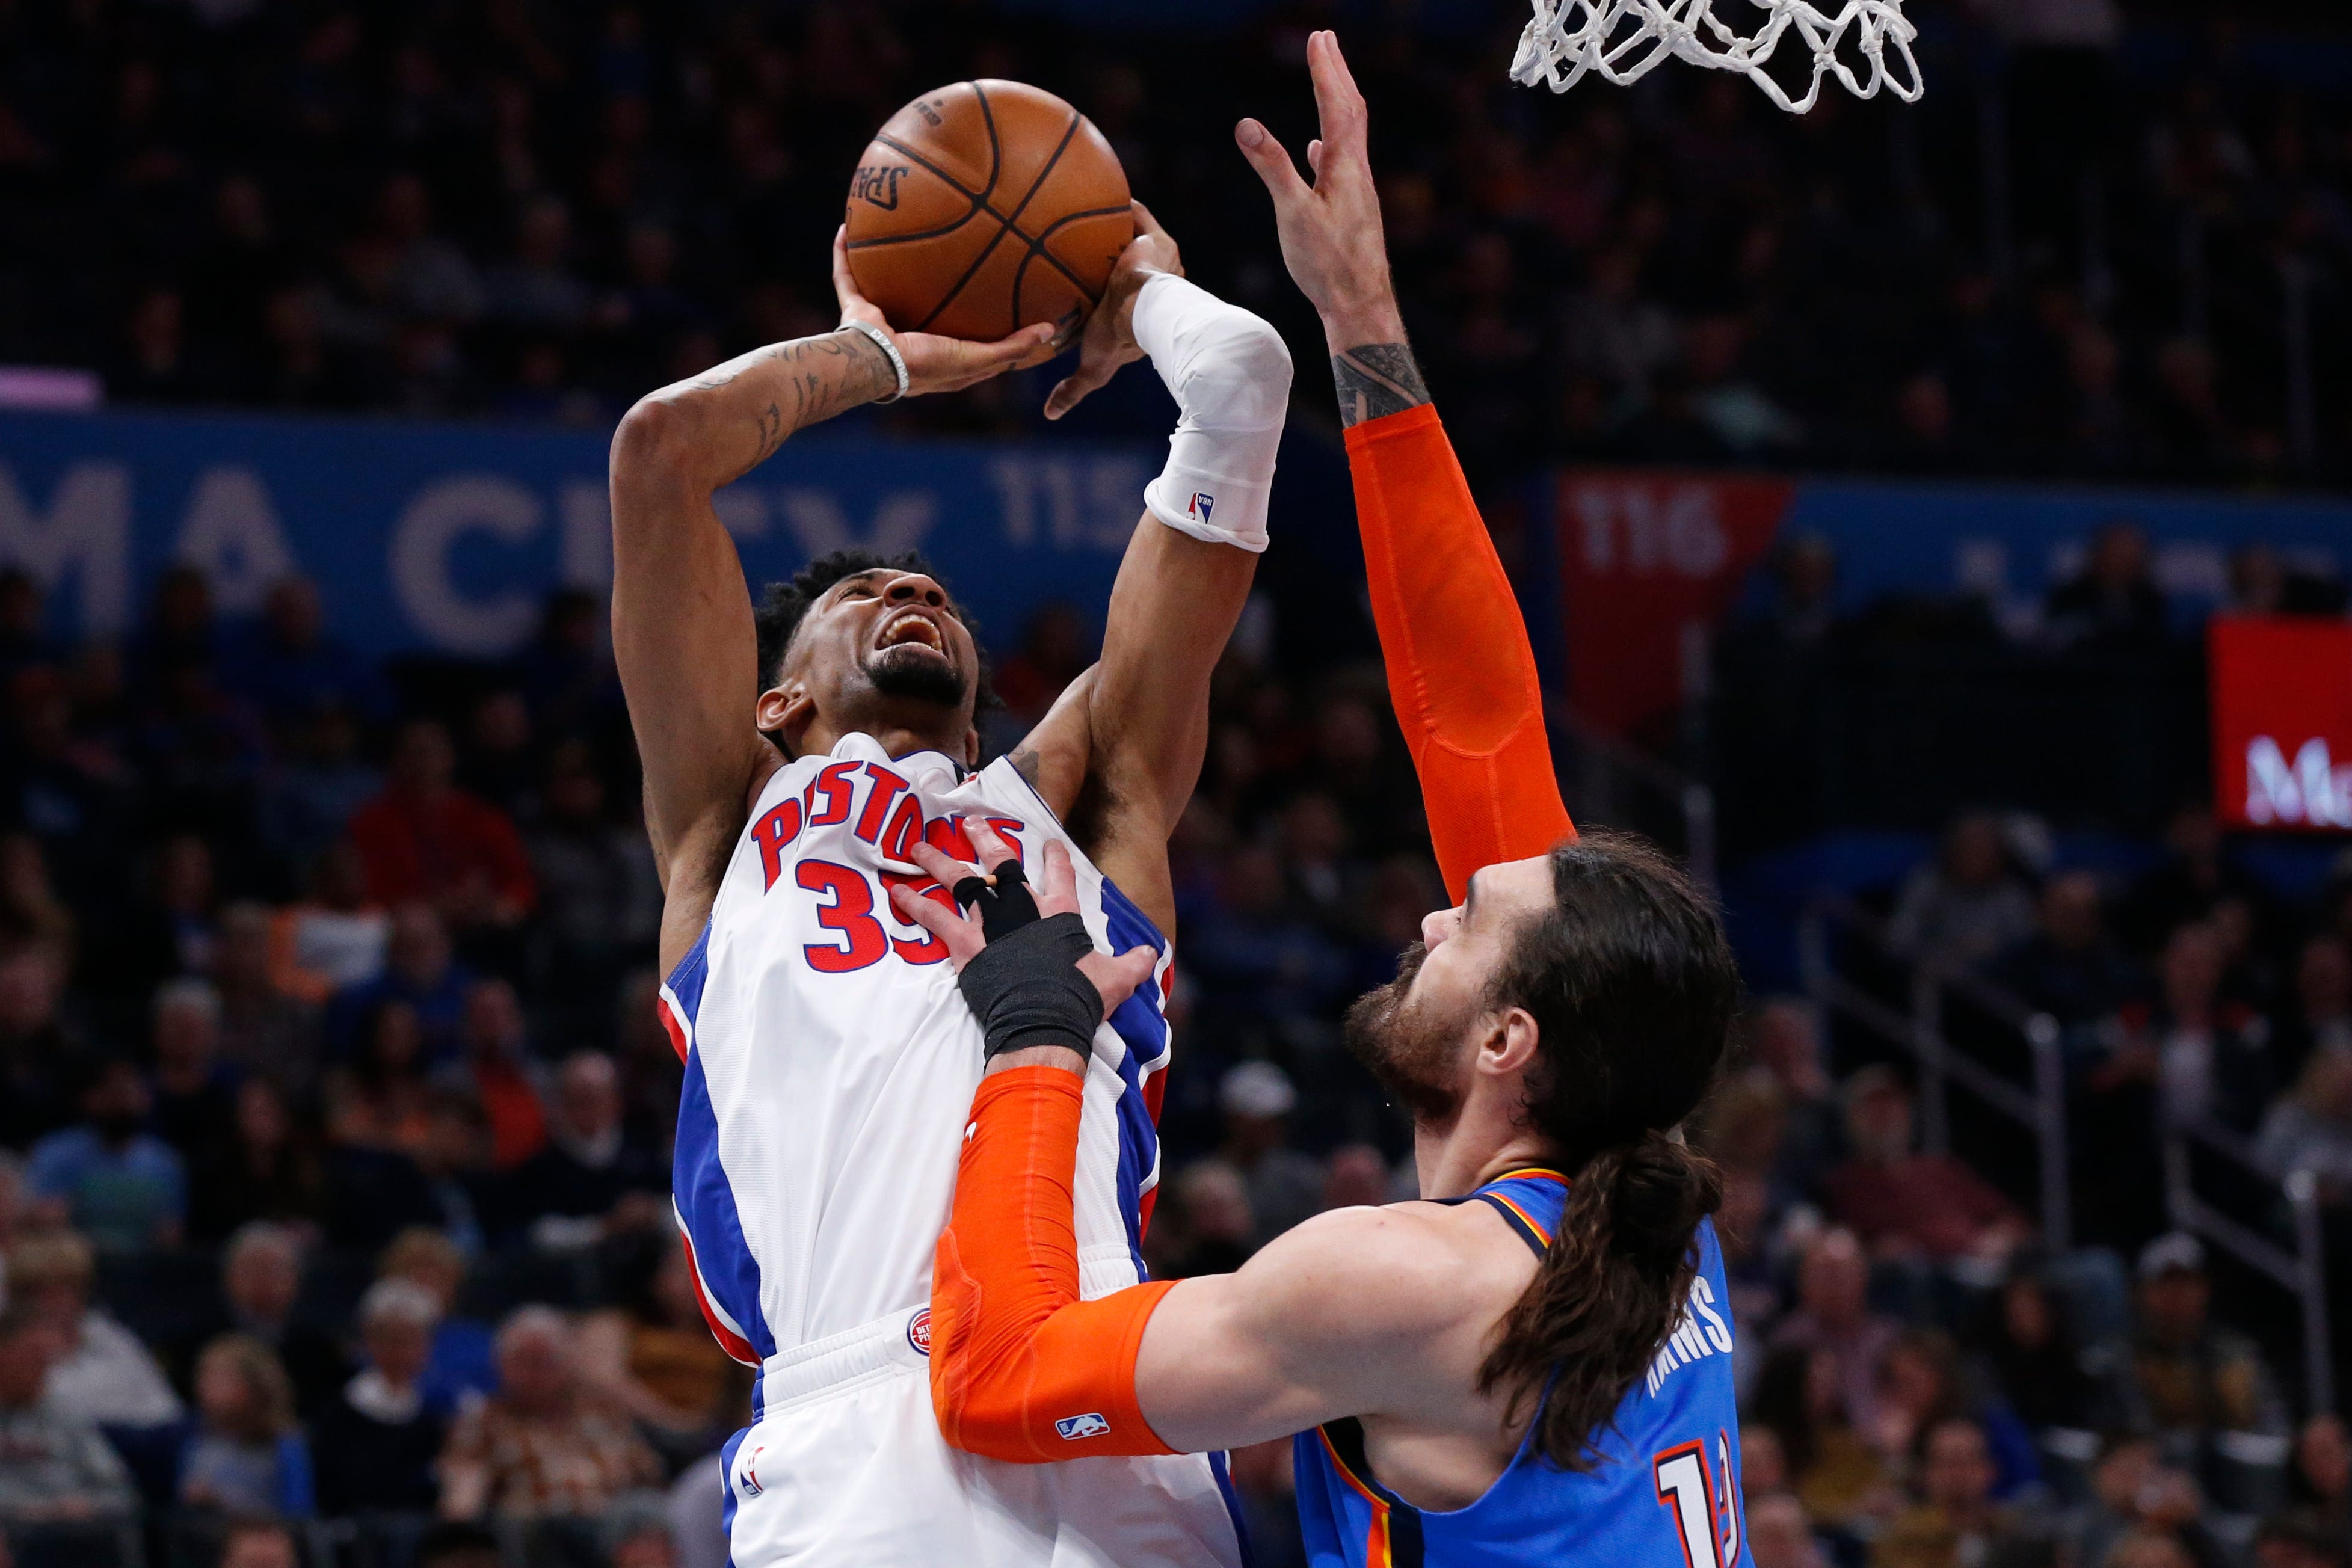 Detroit Pistons forward Christian Wood (35) shoots as Oklahoma City Thunder center Steven Adams defends during the first half.